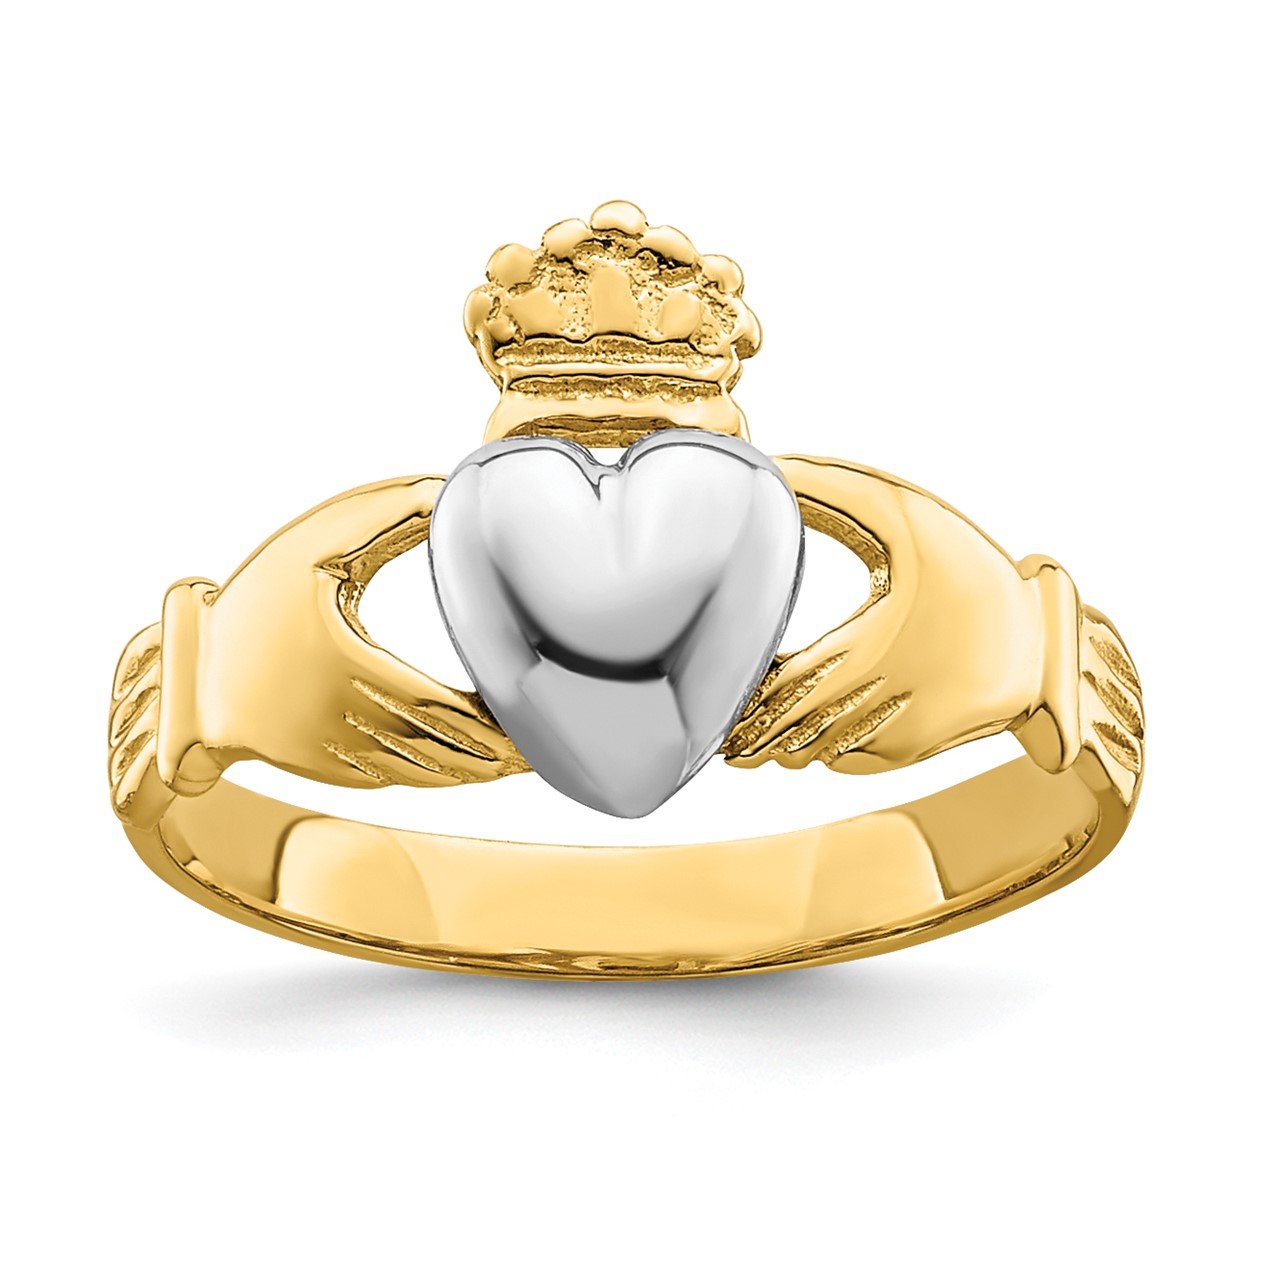 14k TT Yellow and White Gold Baby Claddagh Ring (Development)